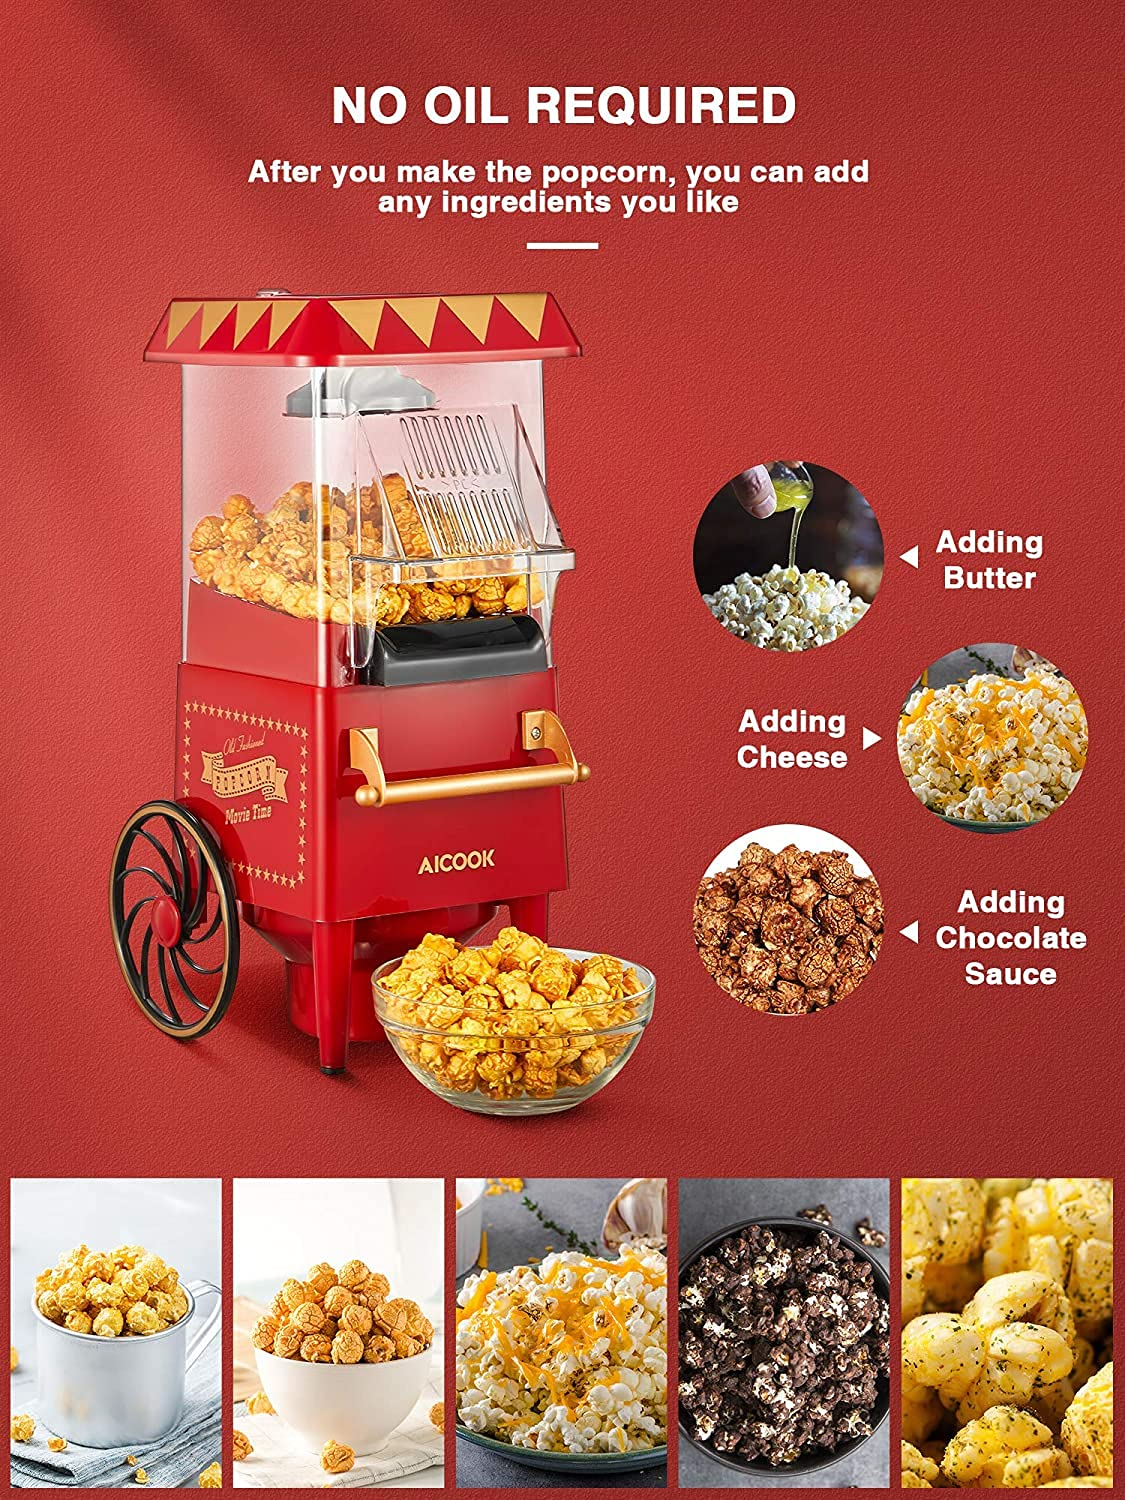 Hot Air Popcorn Popper Maker, 1200W Nostalgia Popcorn Machine with Measuring Cup, Fast Popping, ETL Certified & BPA Free, for Party Christmas and Movie Nights